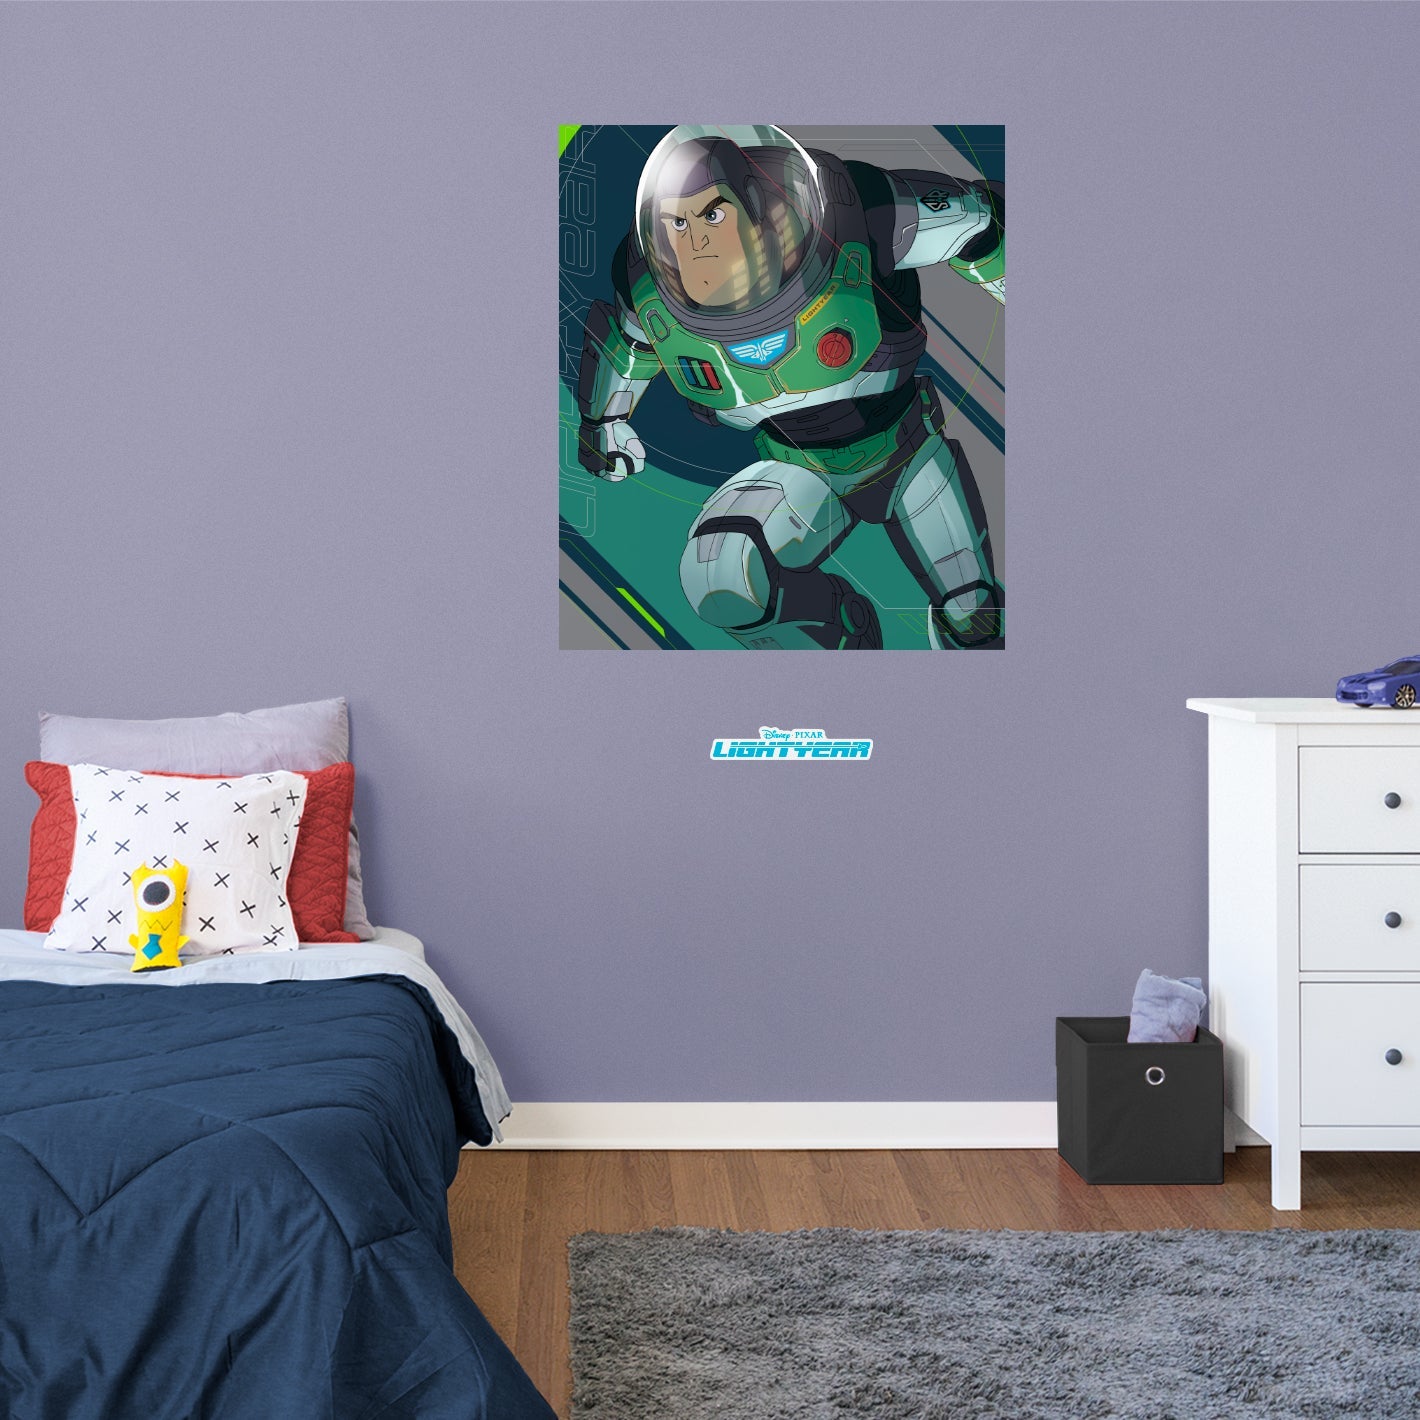 Lightyear: Buzz Lightyear Red Alert- Buzz Poster - Officially Licensed Disney Removable Adhesive Decal